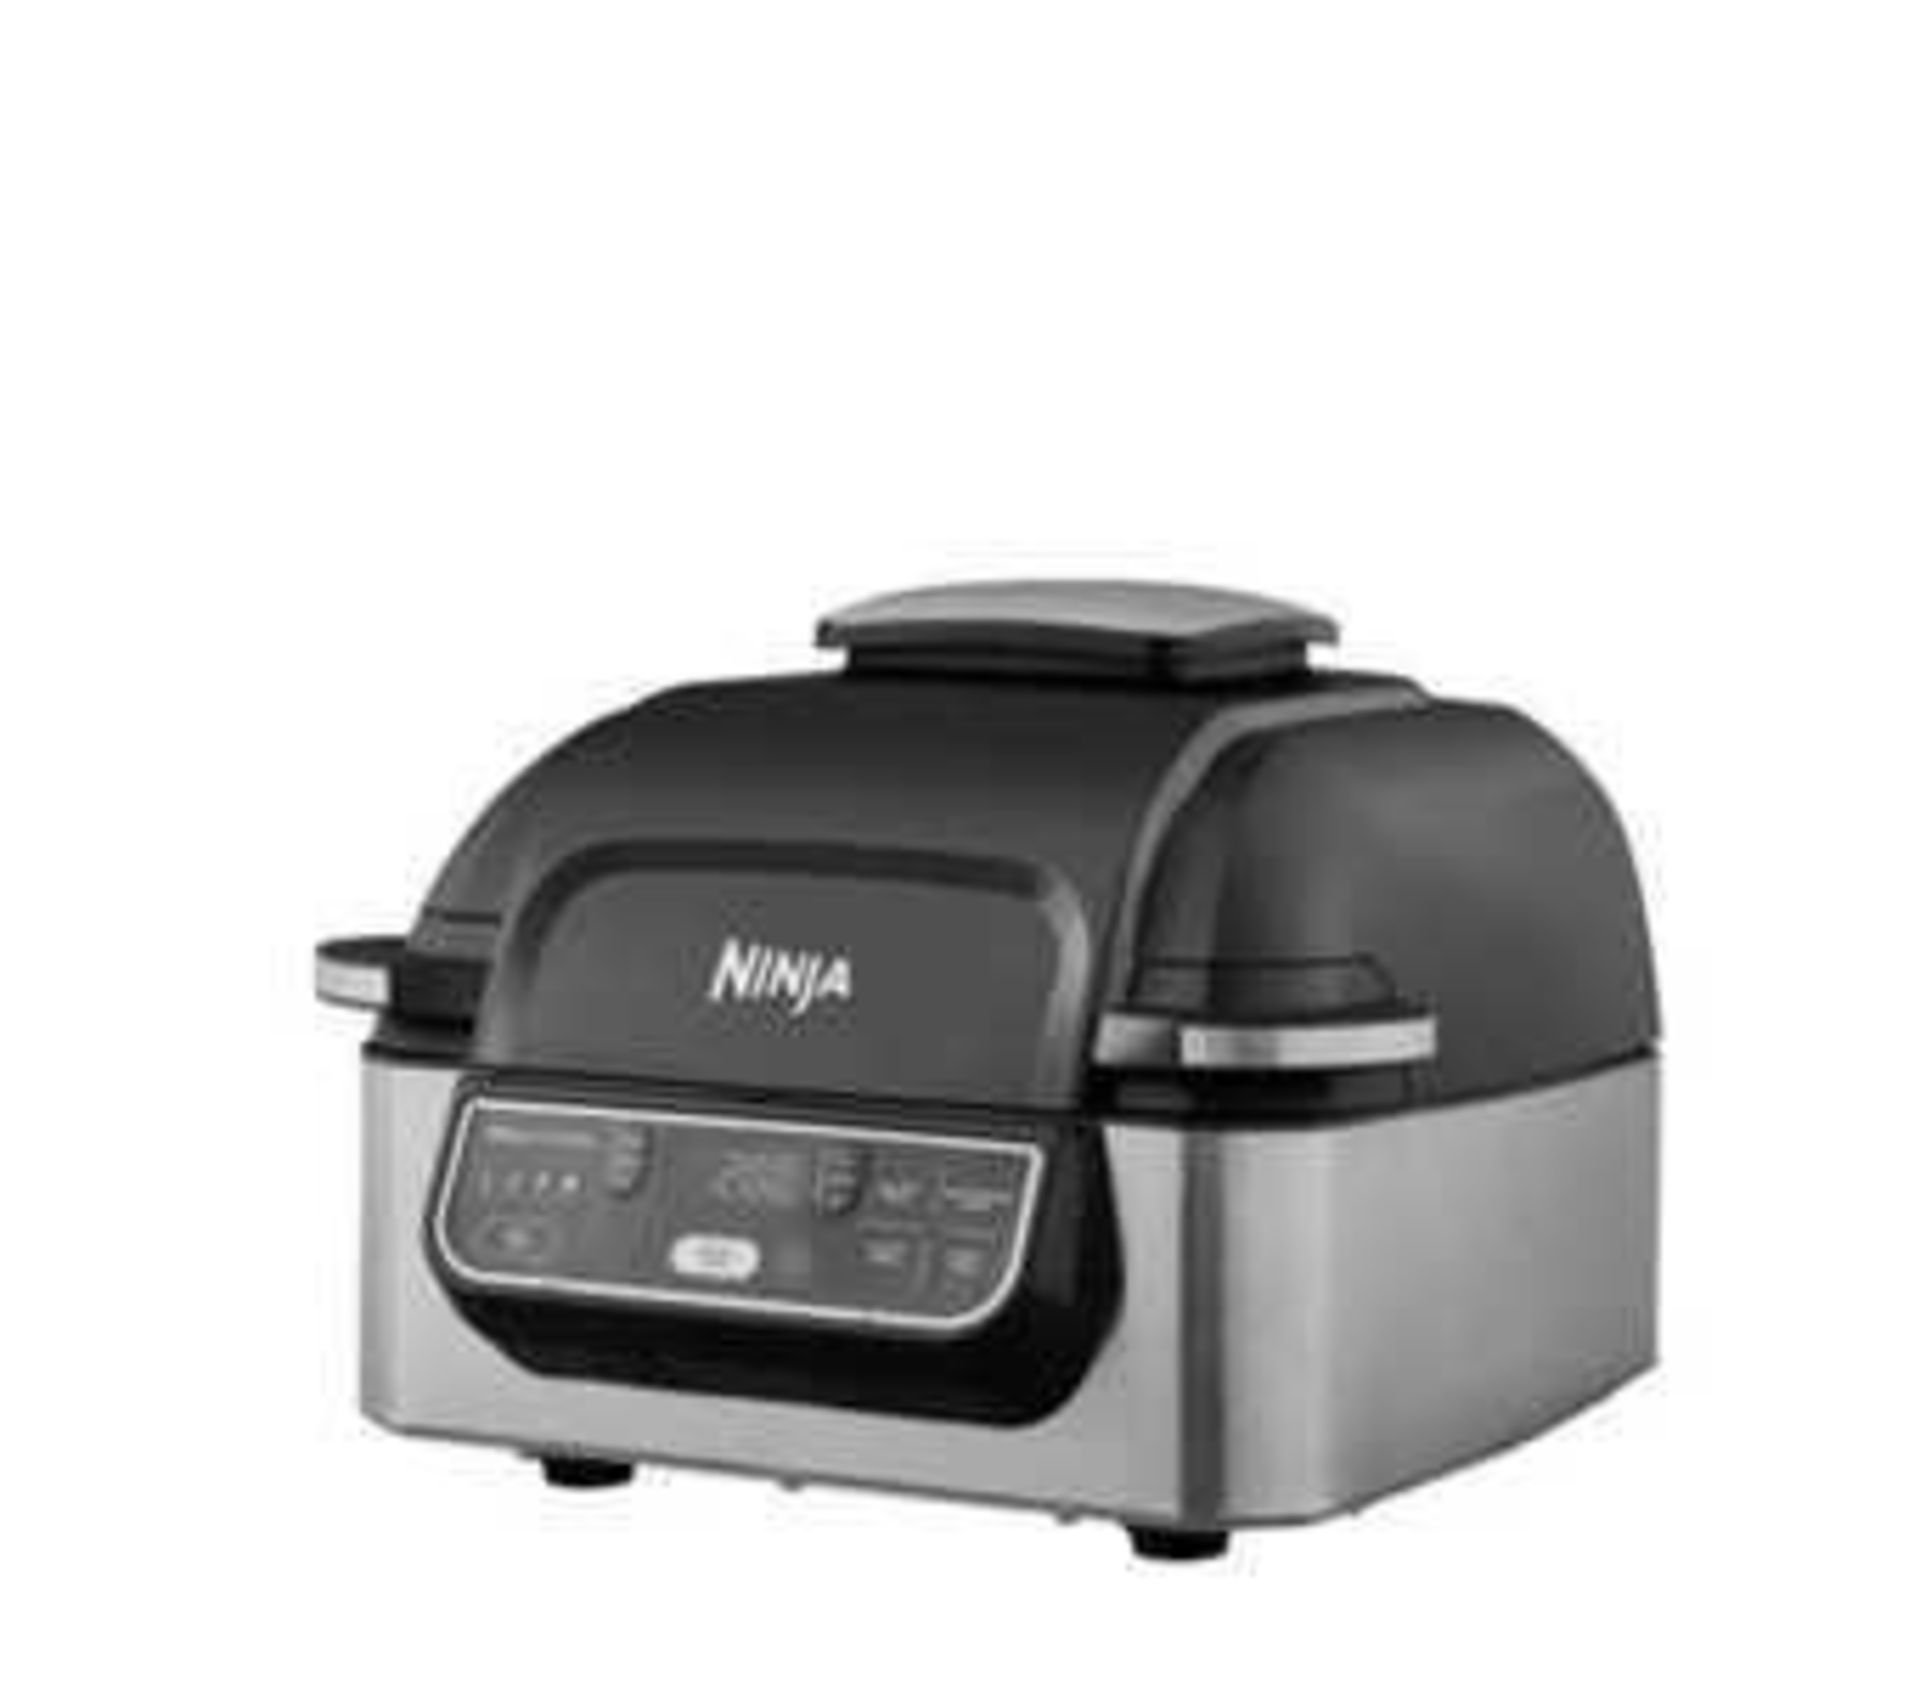 RRP £240 Boxed Ninja Health Grill And Air Fryer Food Cooker With 5 Customisable Programs